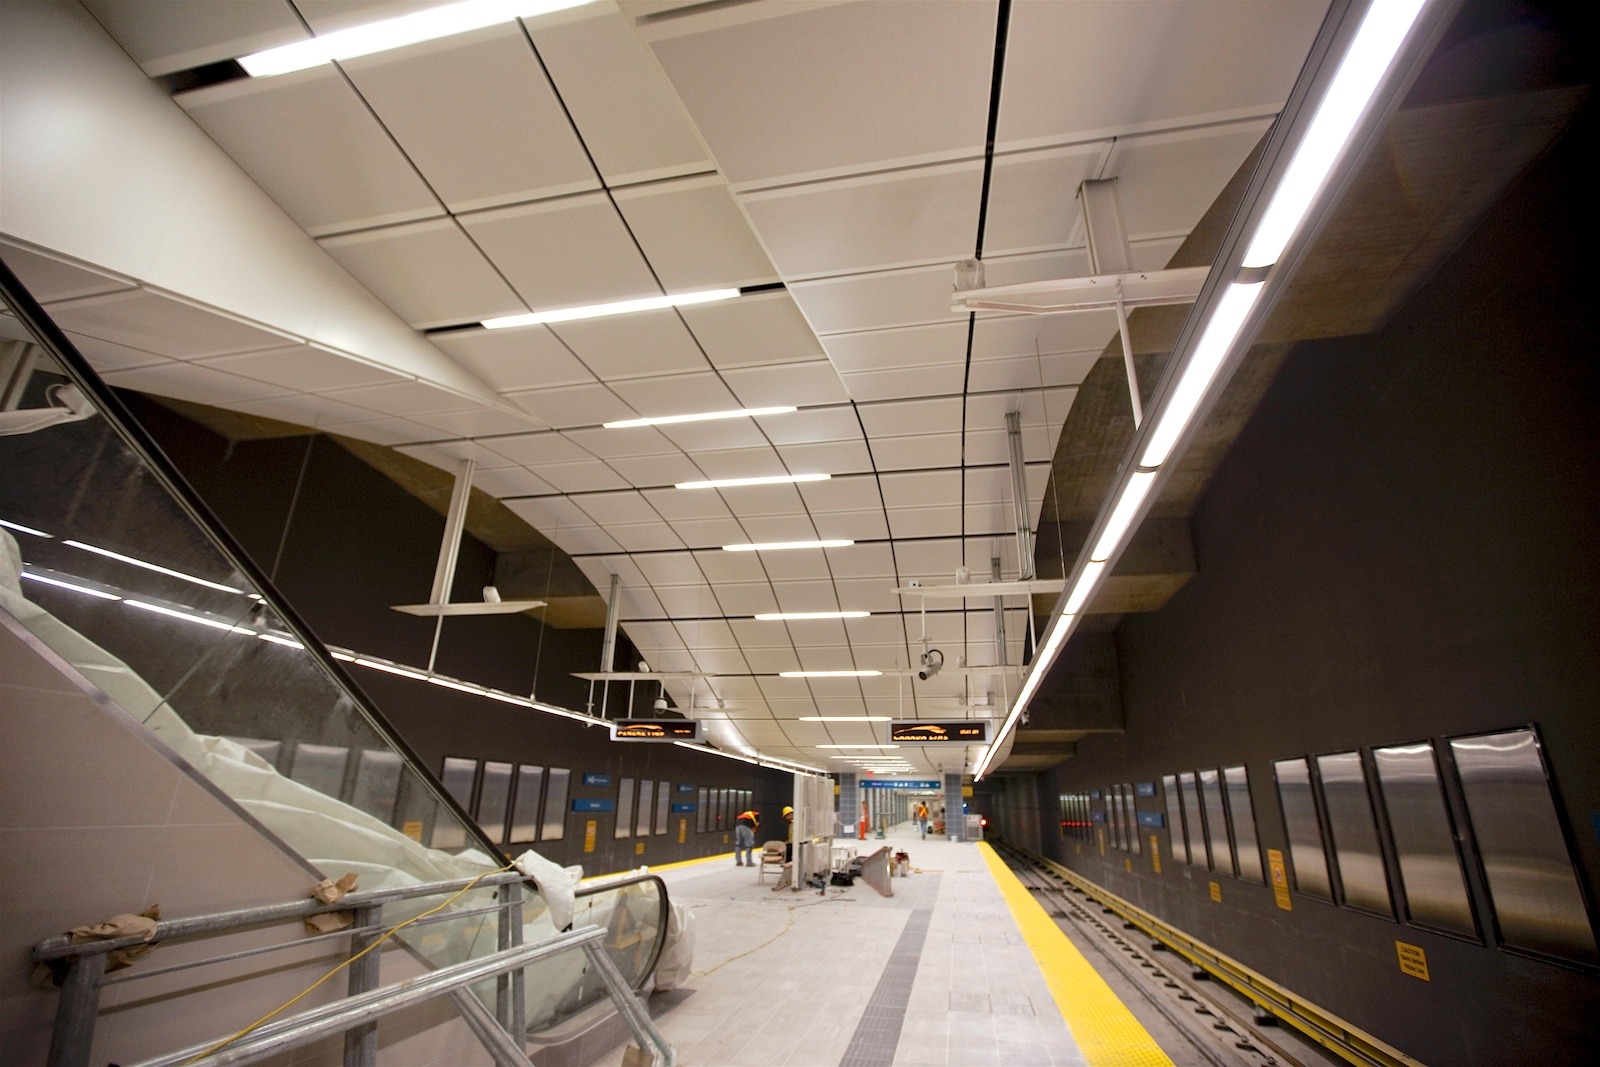  WATERFRONT SKYTRAIN STATION